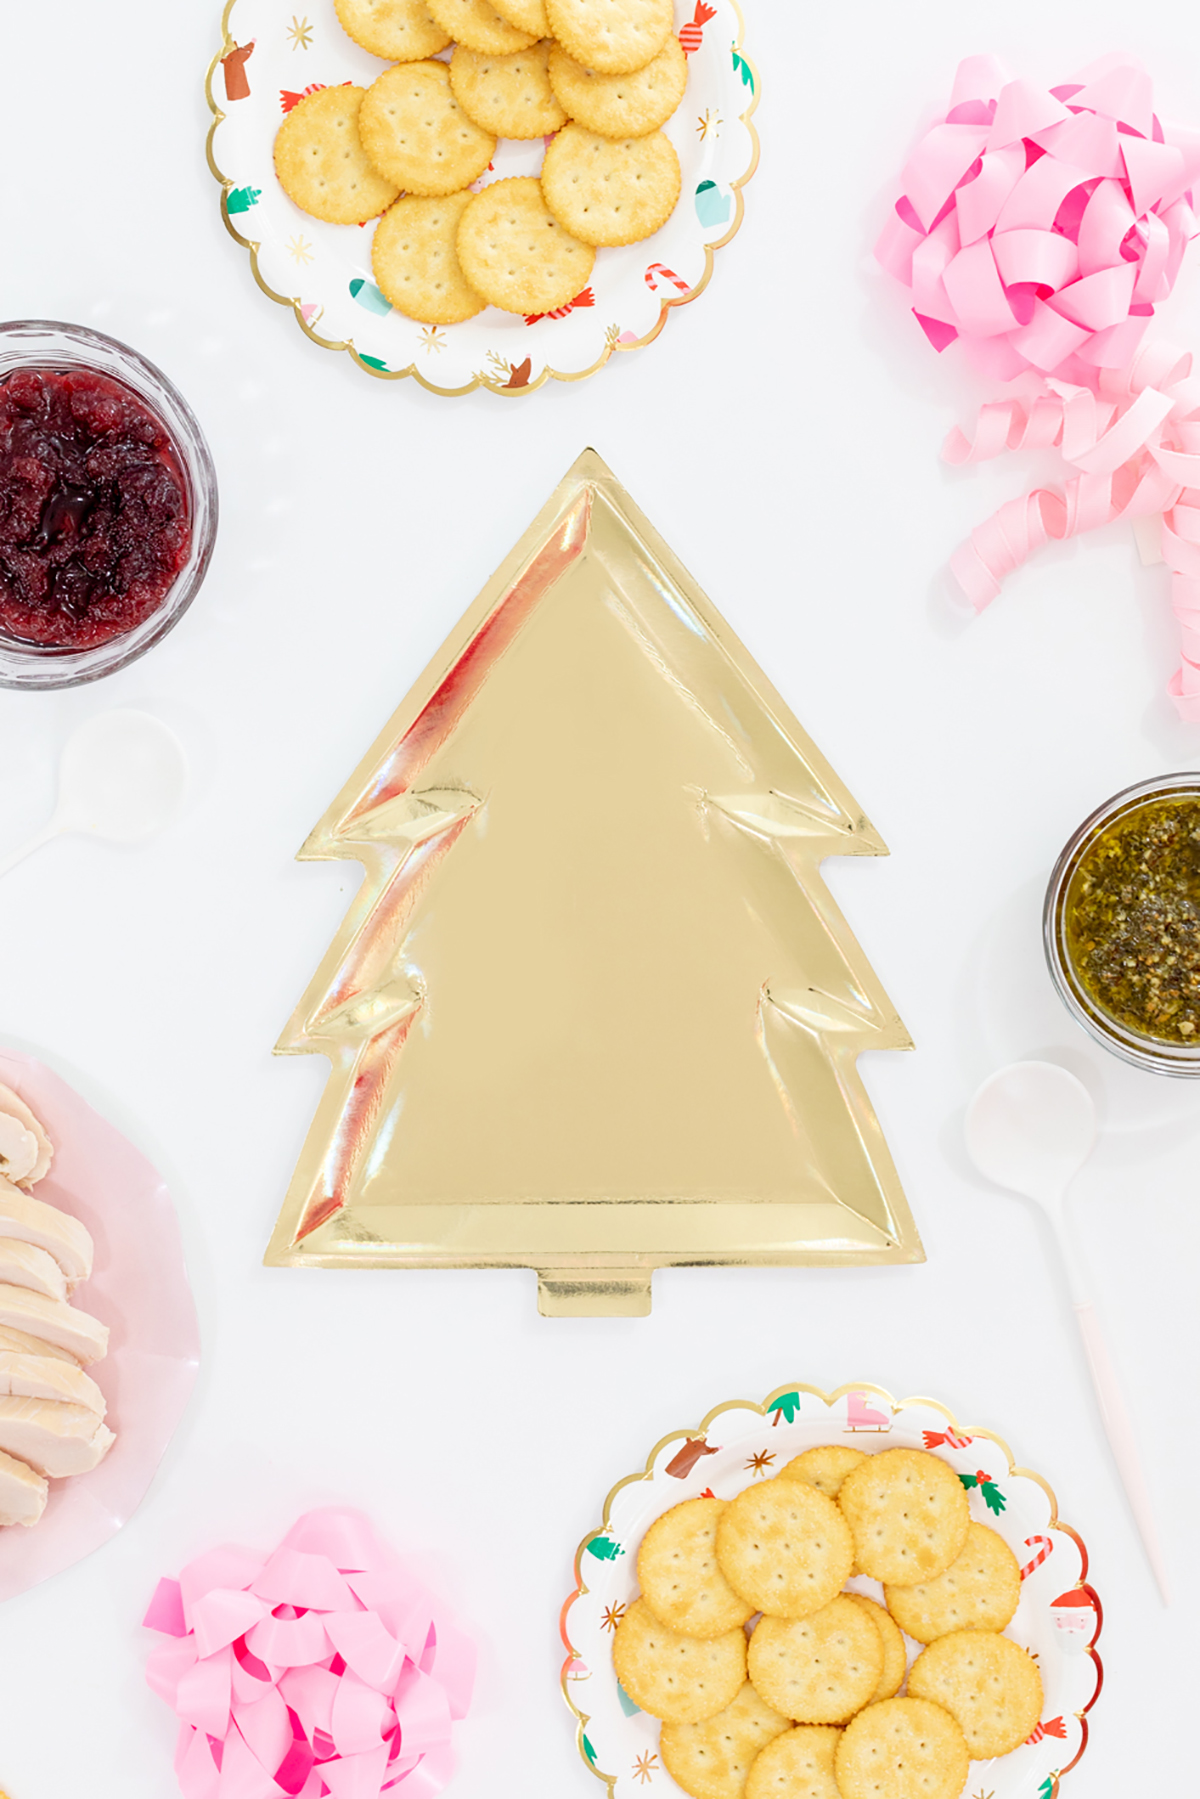 Gold Christmas tree plate and fixings to make cracker sandwich appetizers